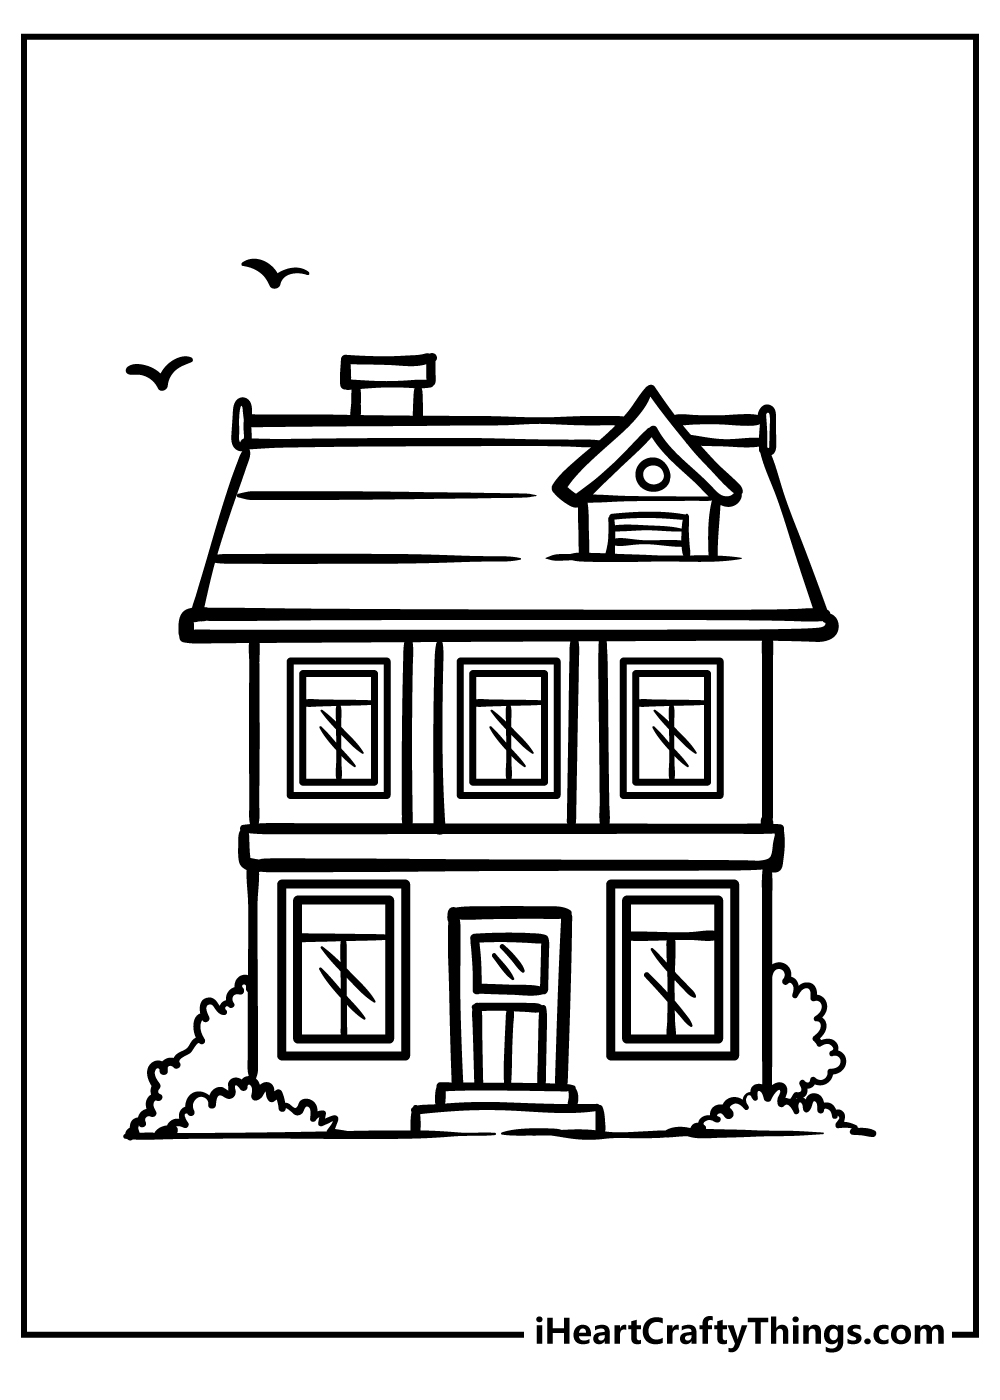 House coloring pages free printable